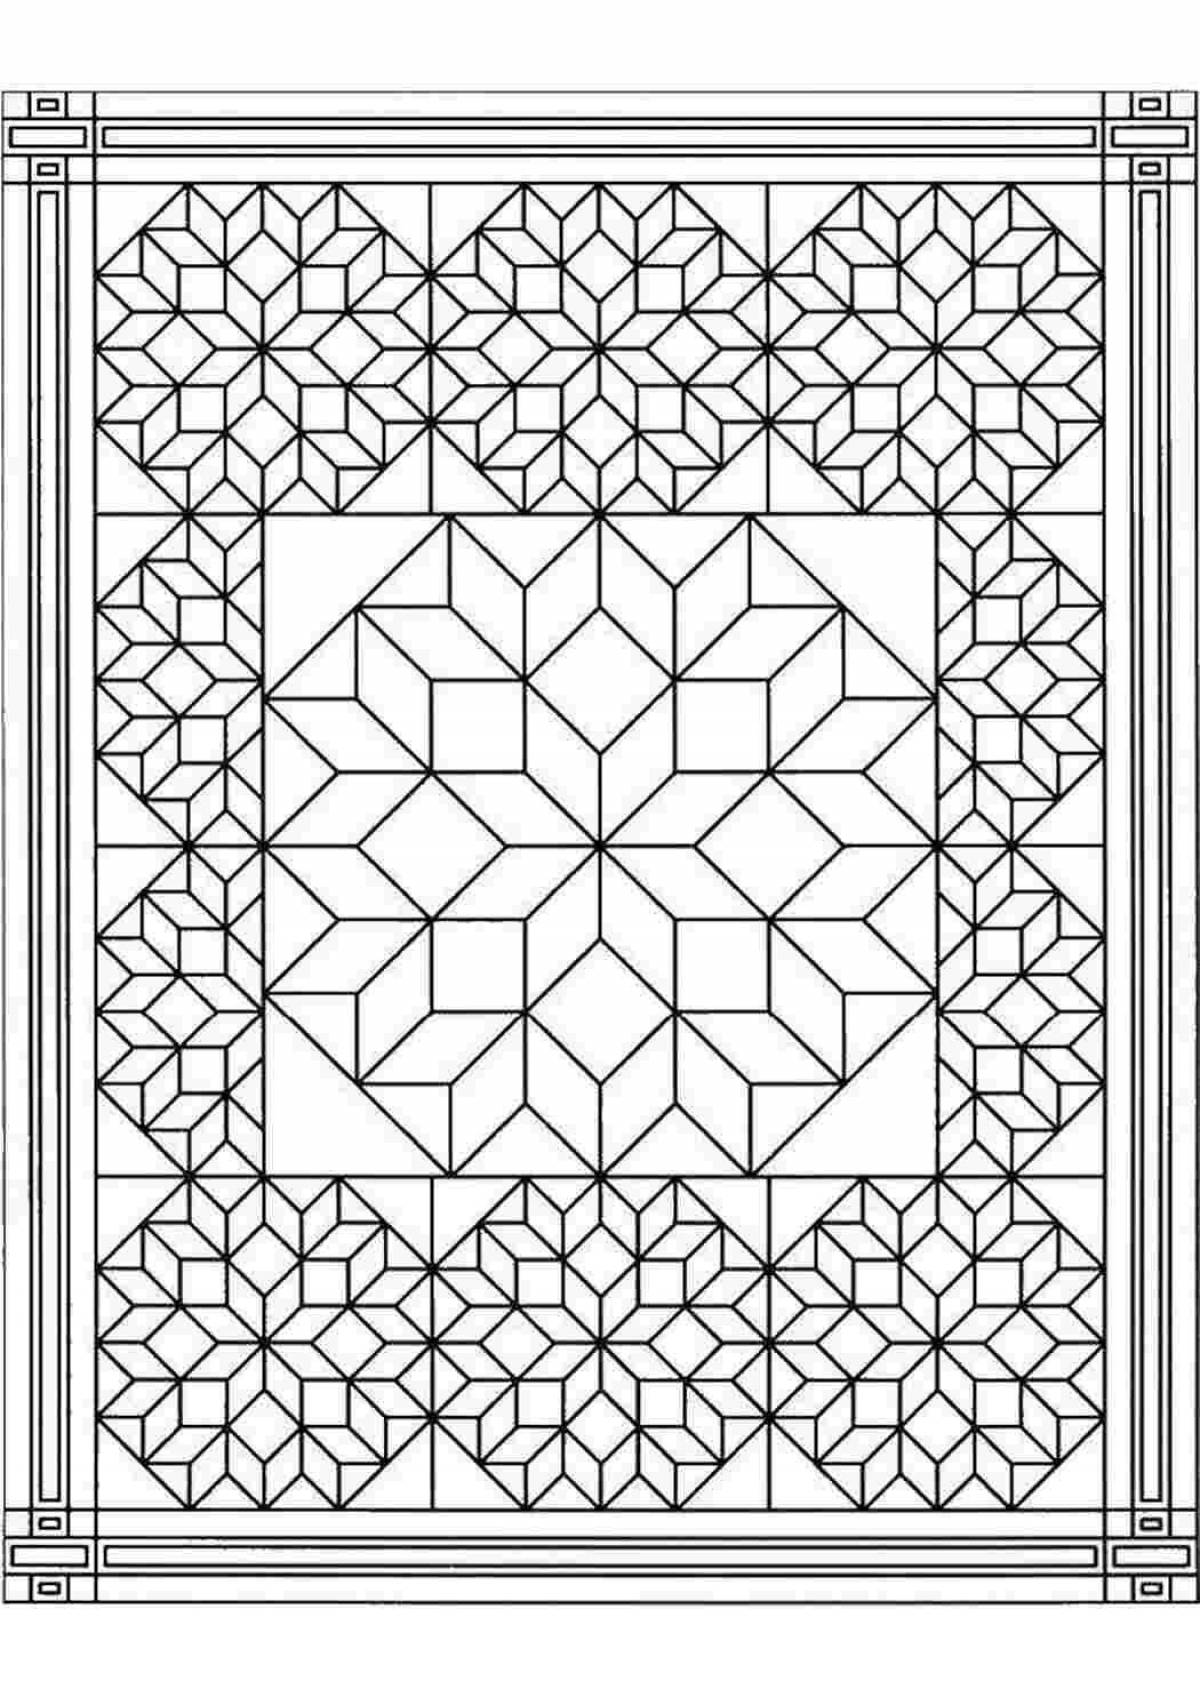 Coloring book with bright geometric pattern